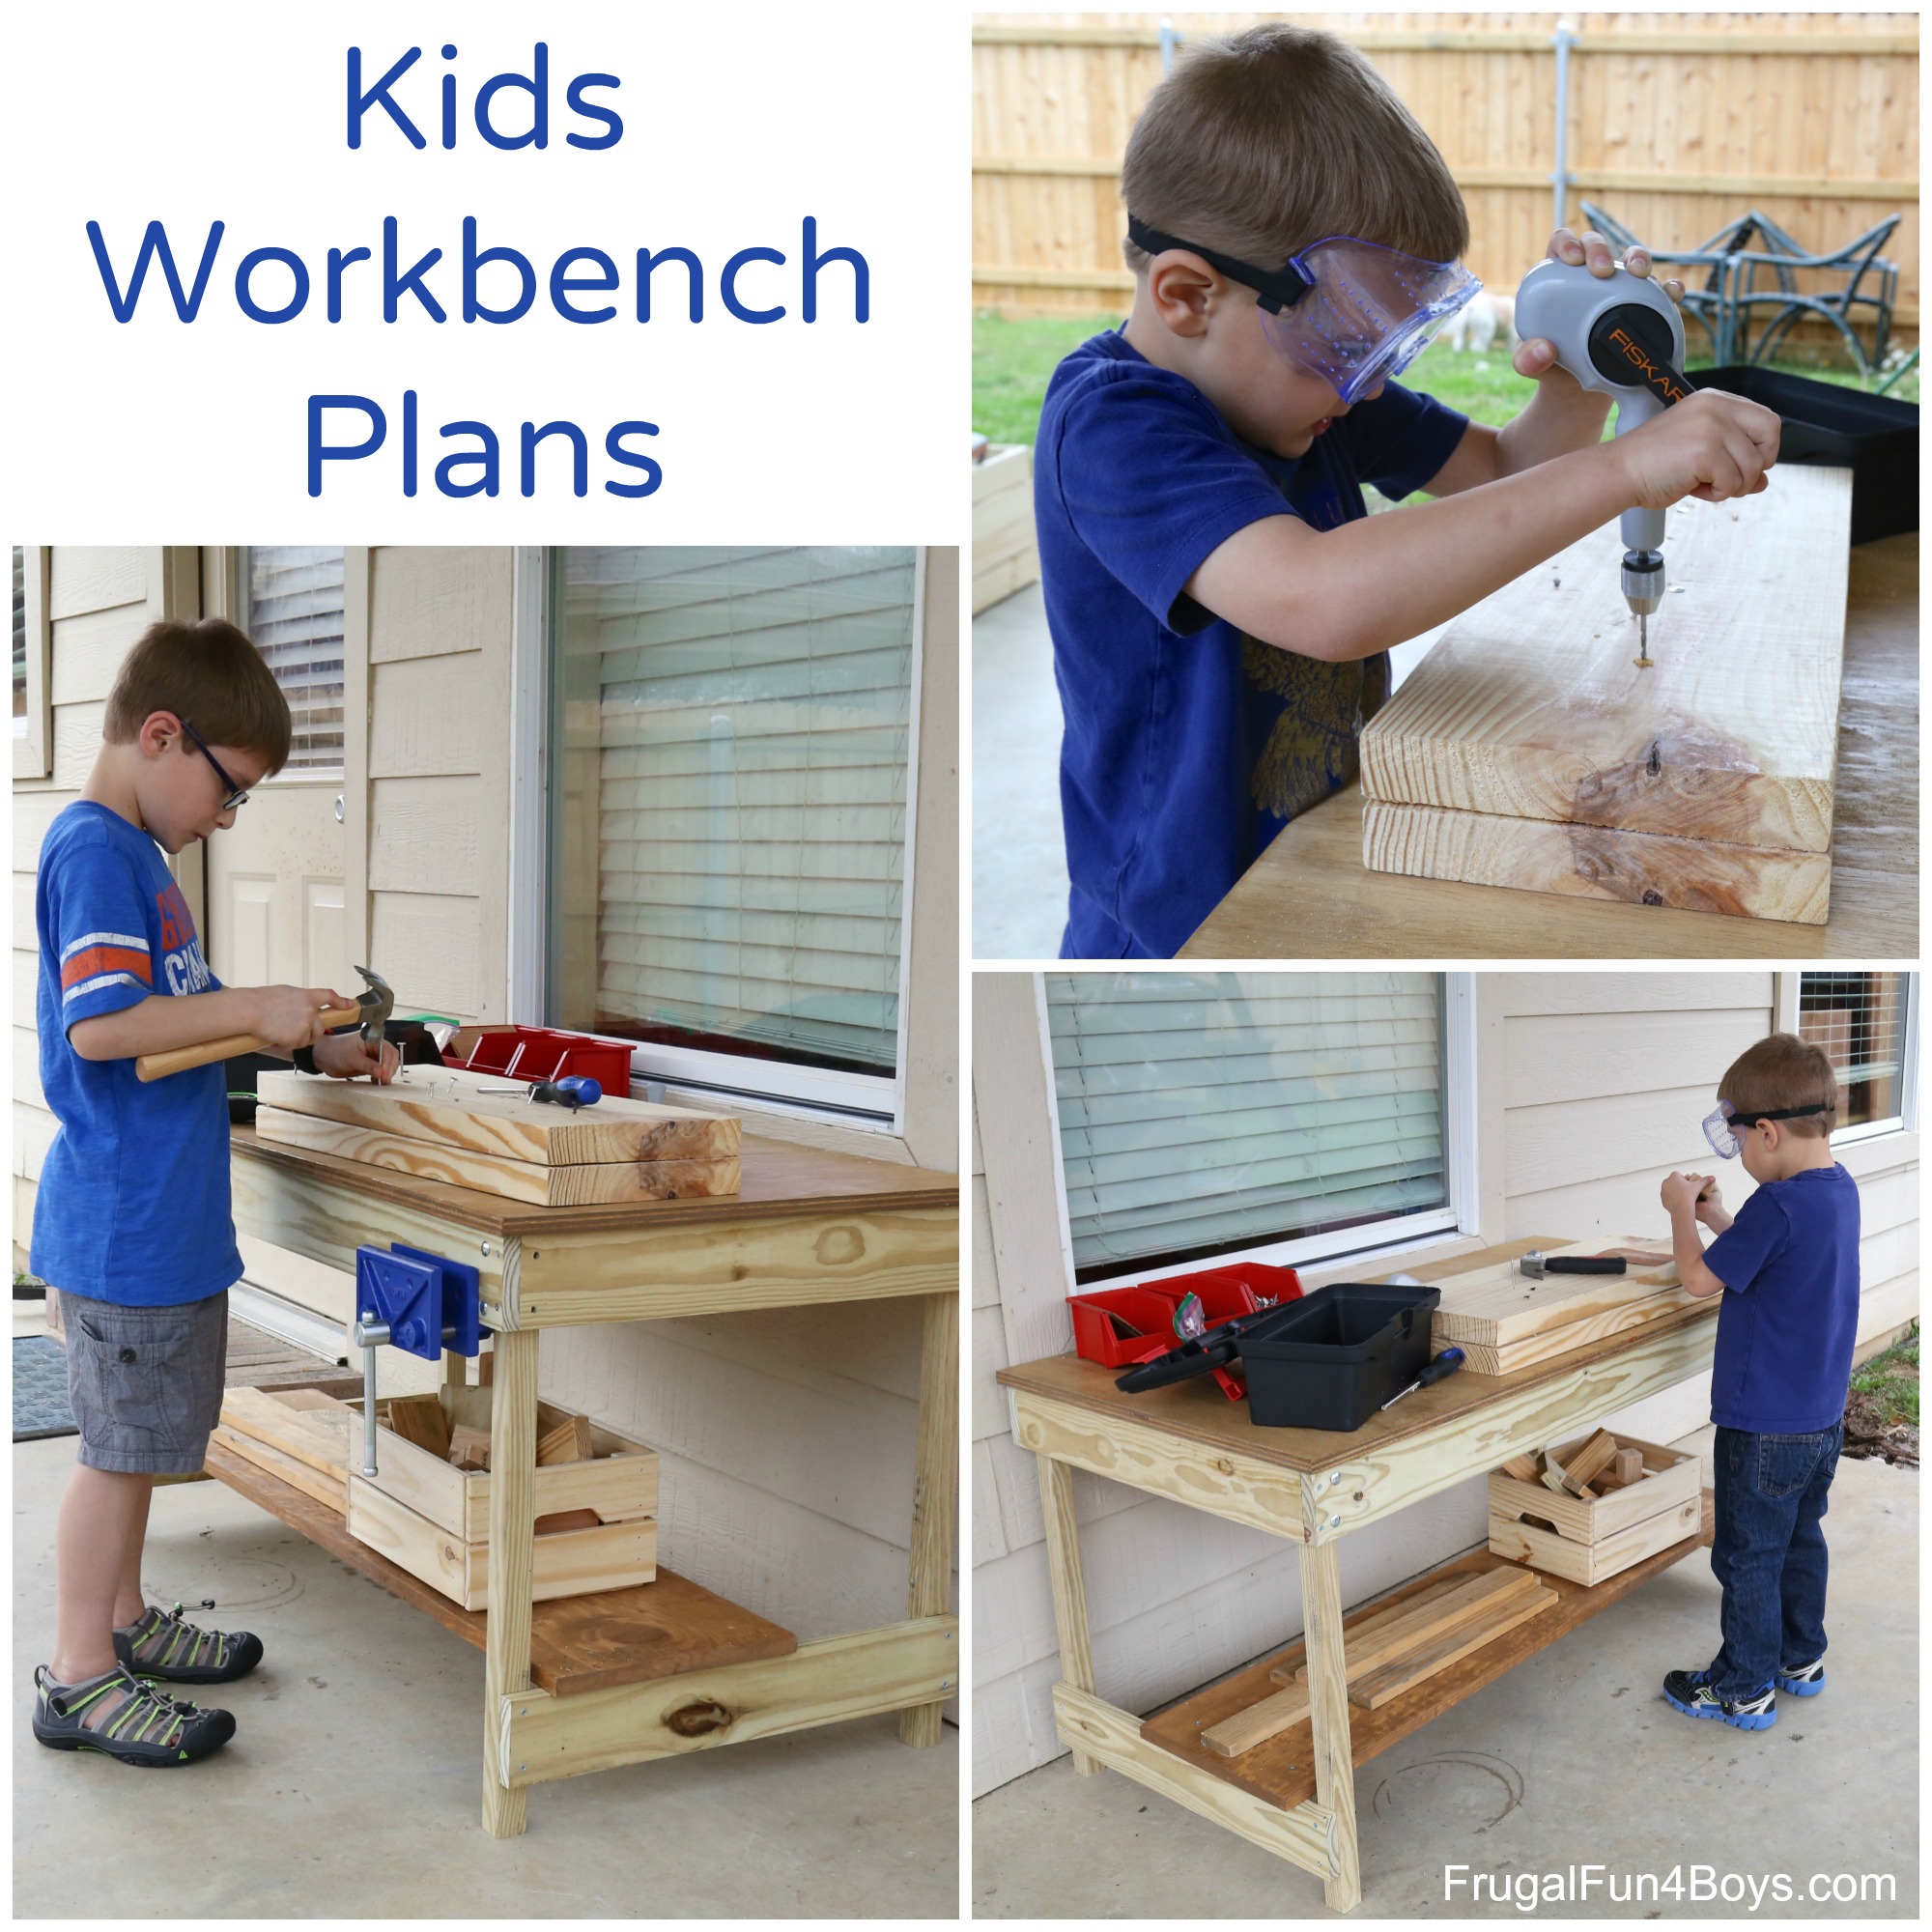 Kids Workbench Plans - Woodworking for Kids